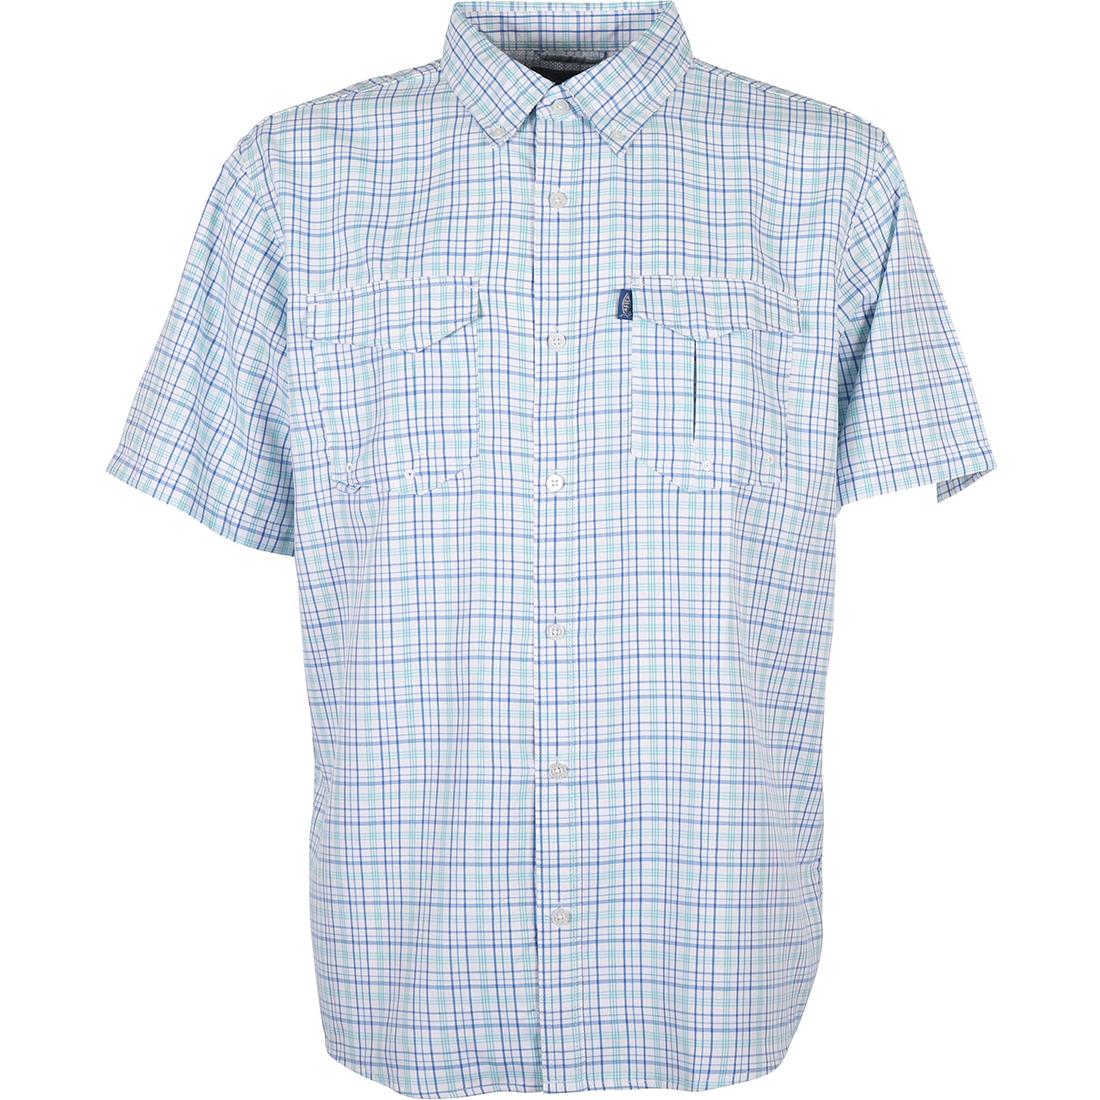 Aftco Men's INTERSECTION SS BUTTON DOWN